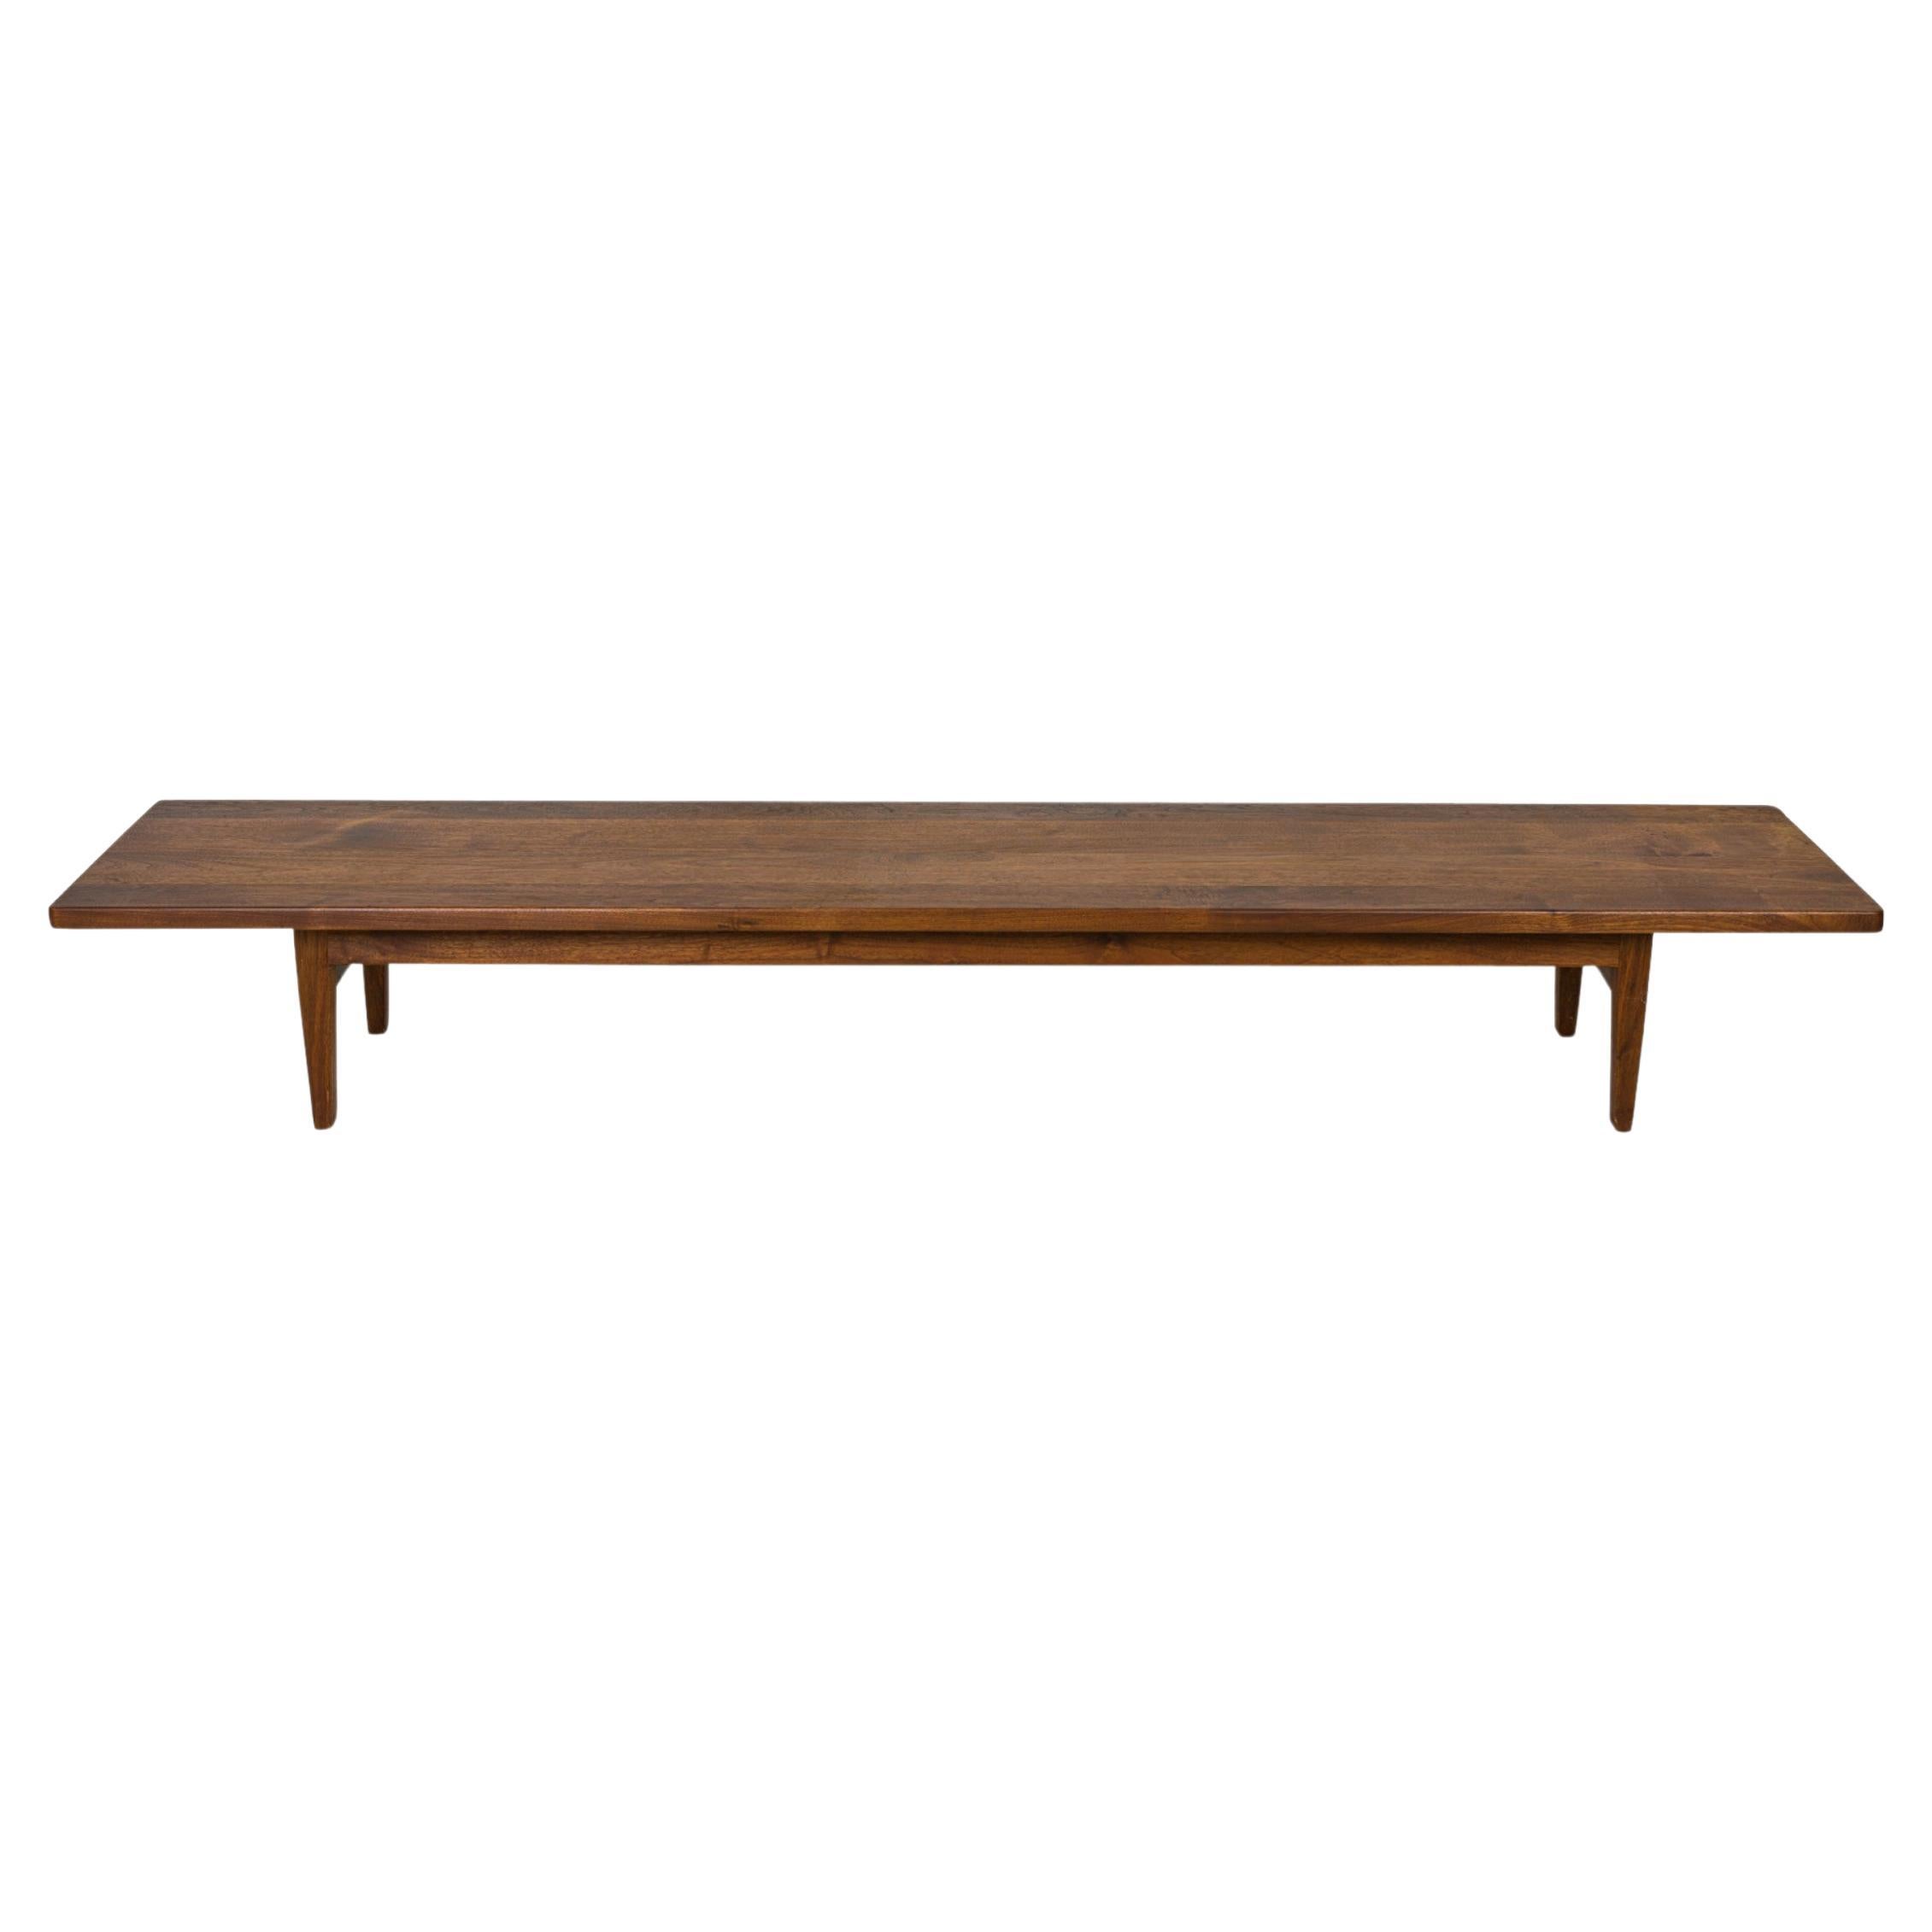 Arden Riddle American Mid-Century Wooden Low Table For Sale